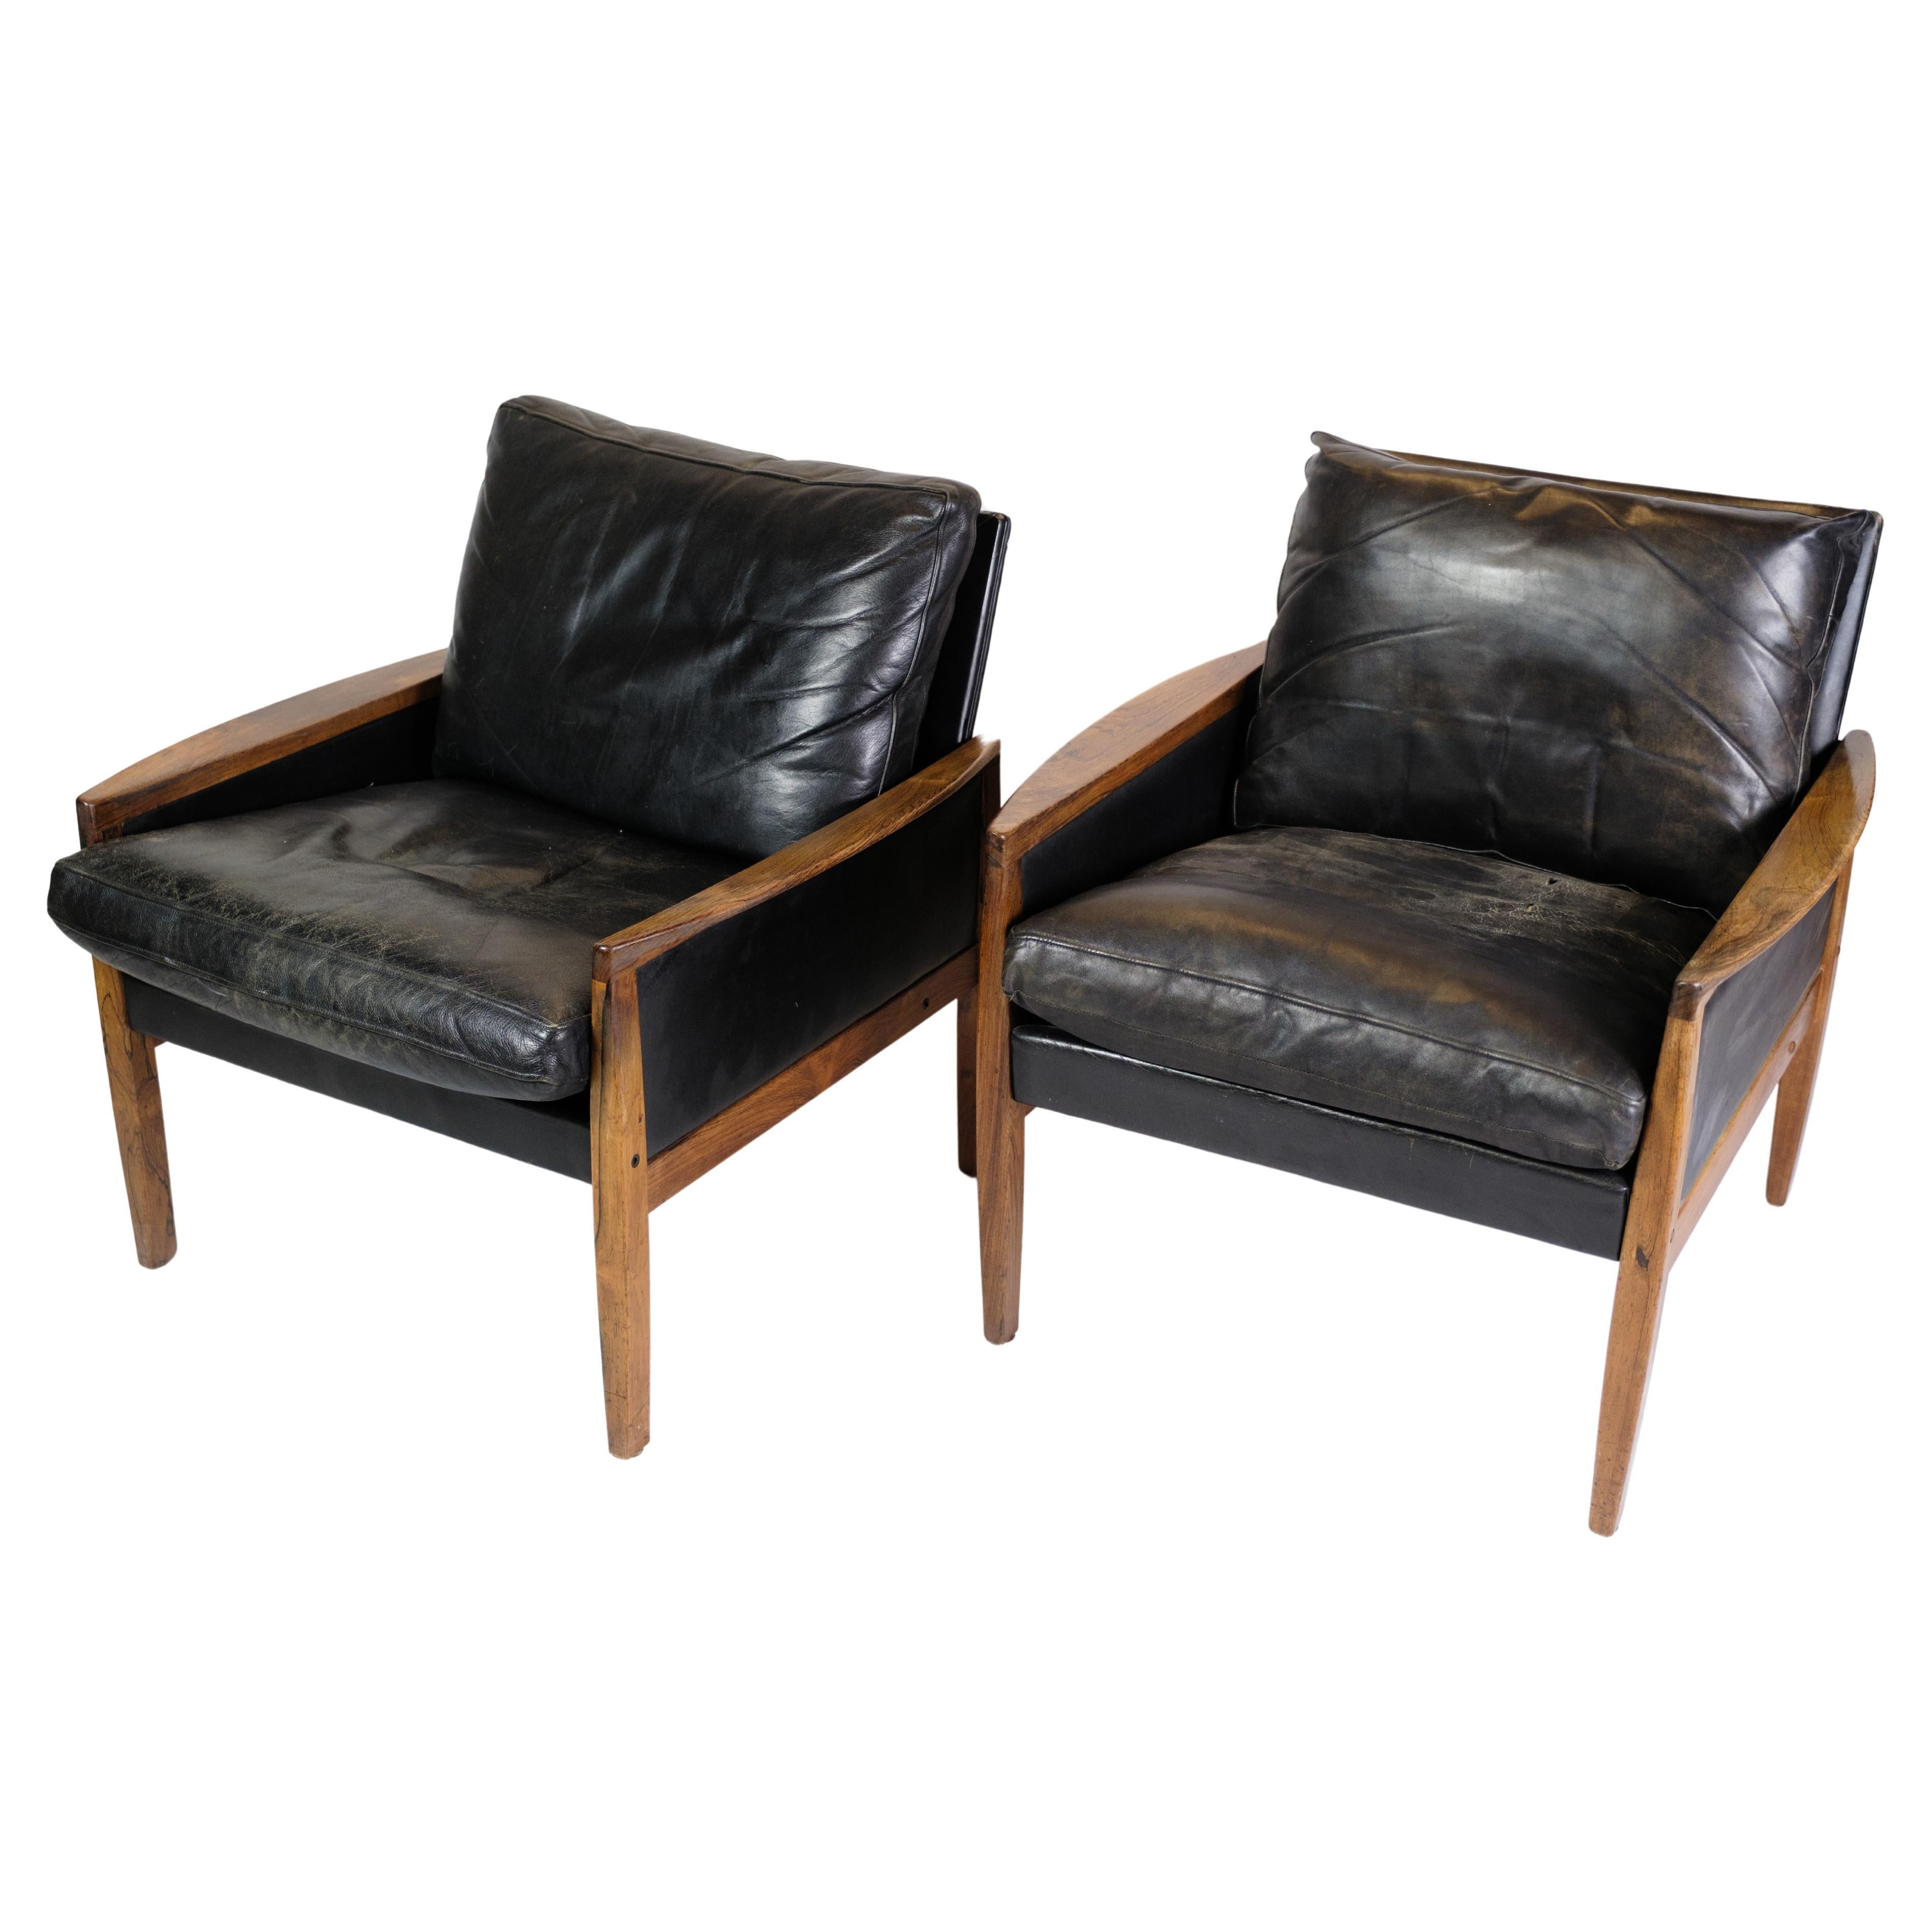 2 Armchairs Made In Rosewood By Hans Olsen Made By Brdr. Juul K. From 1960s